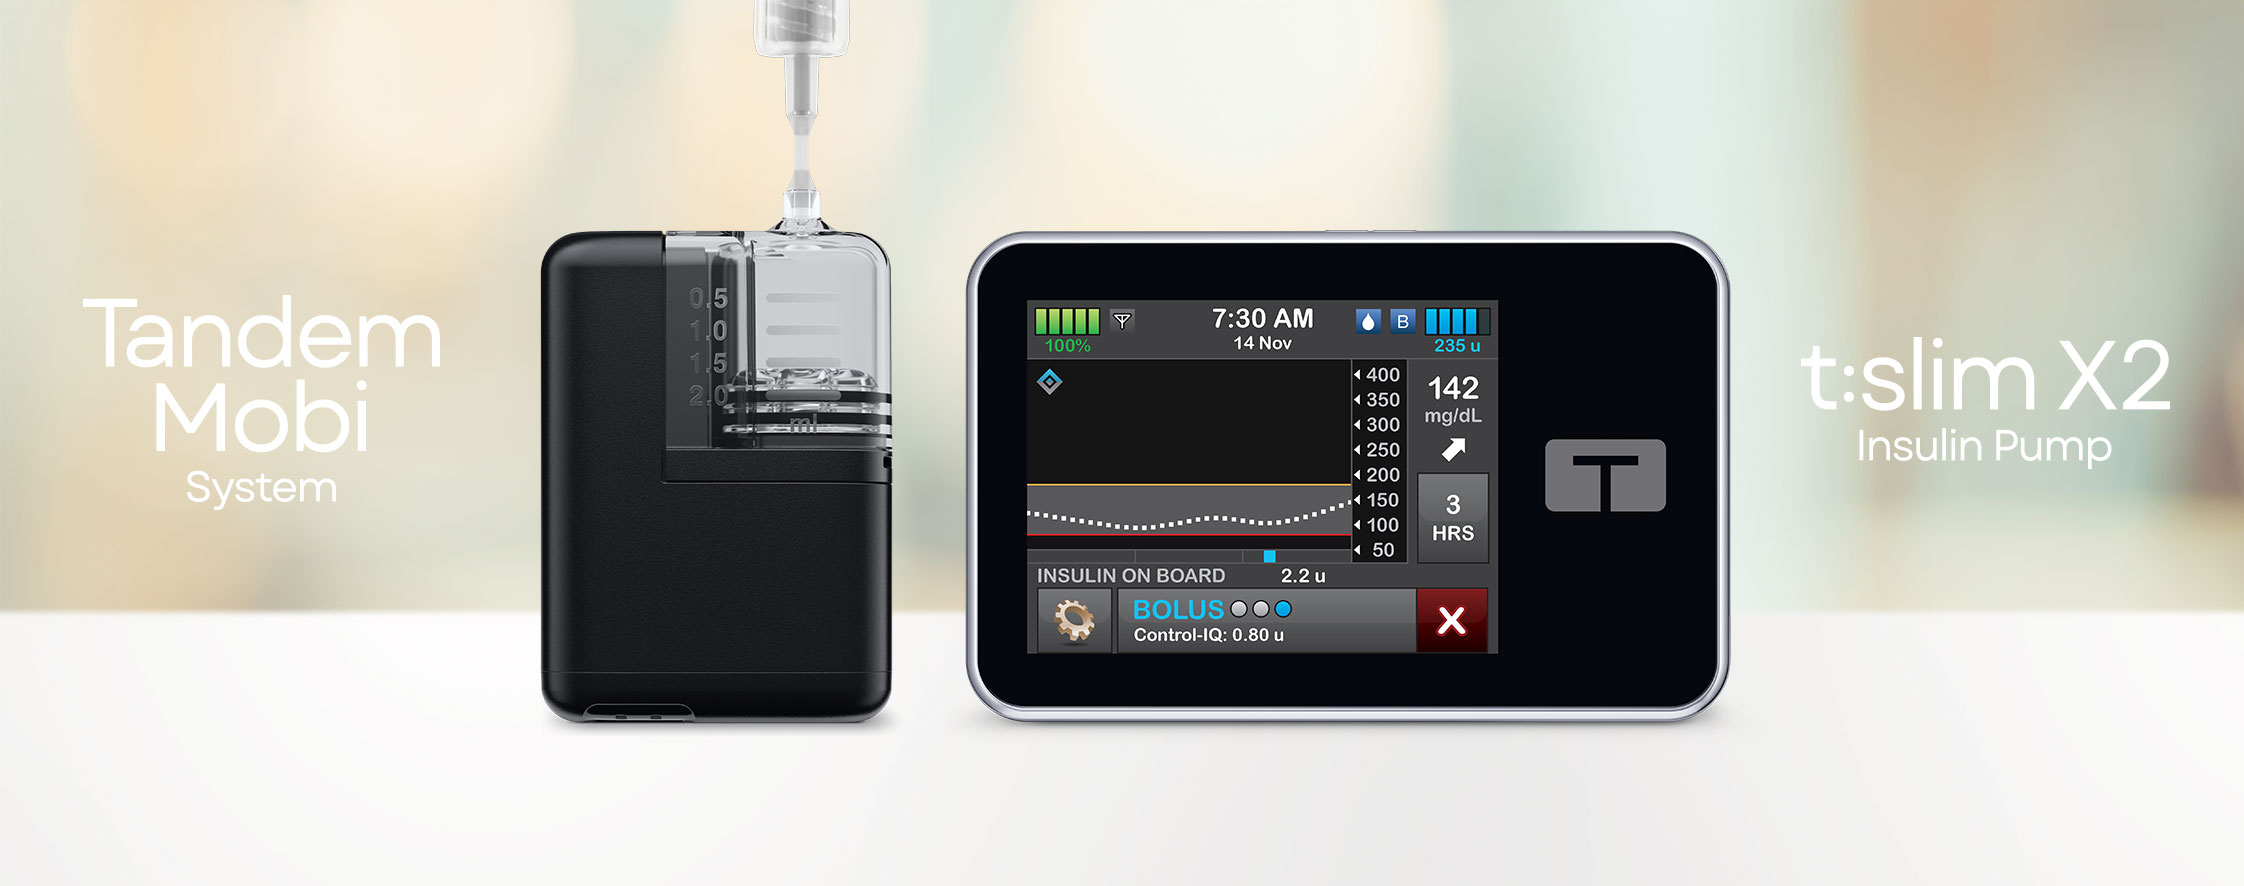 The Tandem Mobi System and Tandem t:slim X2 Insulin Pump shown side by side